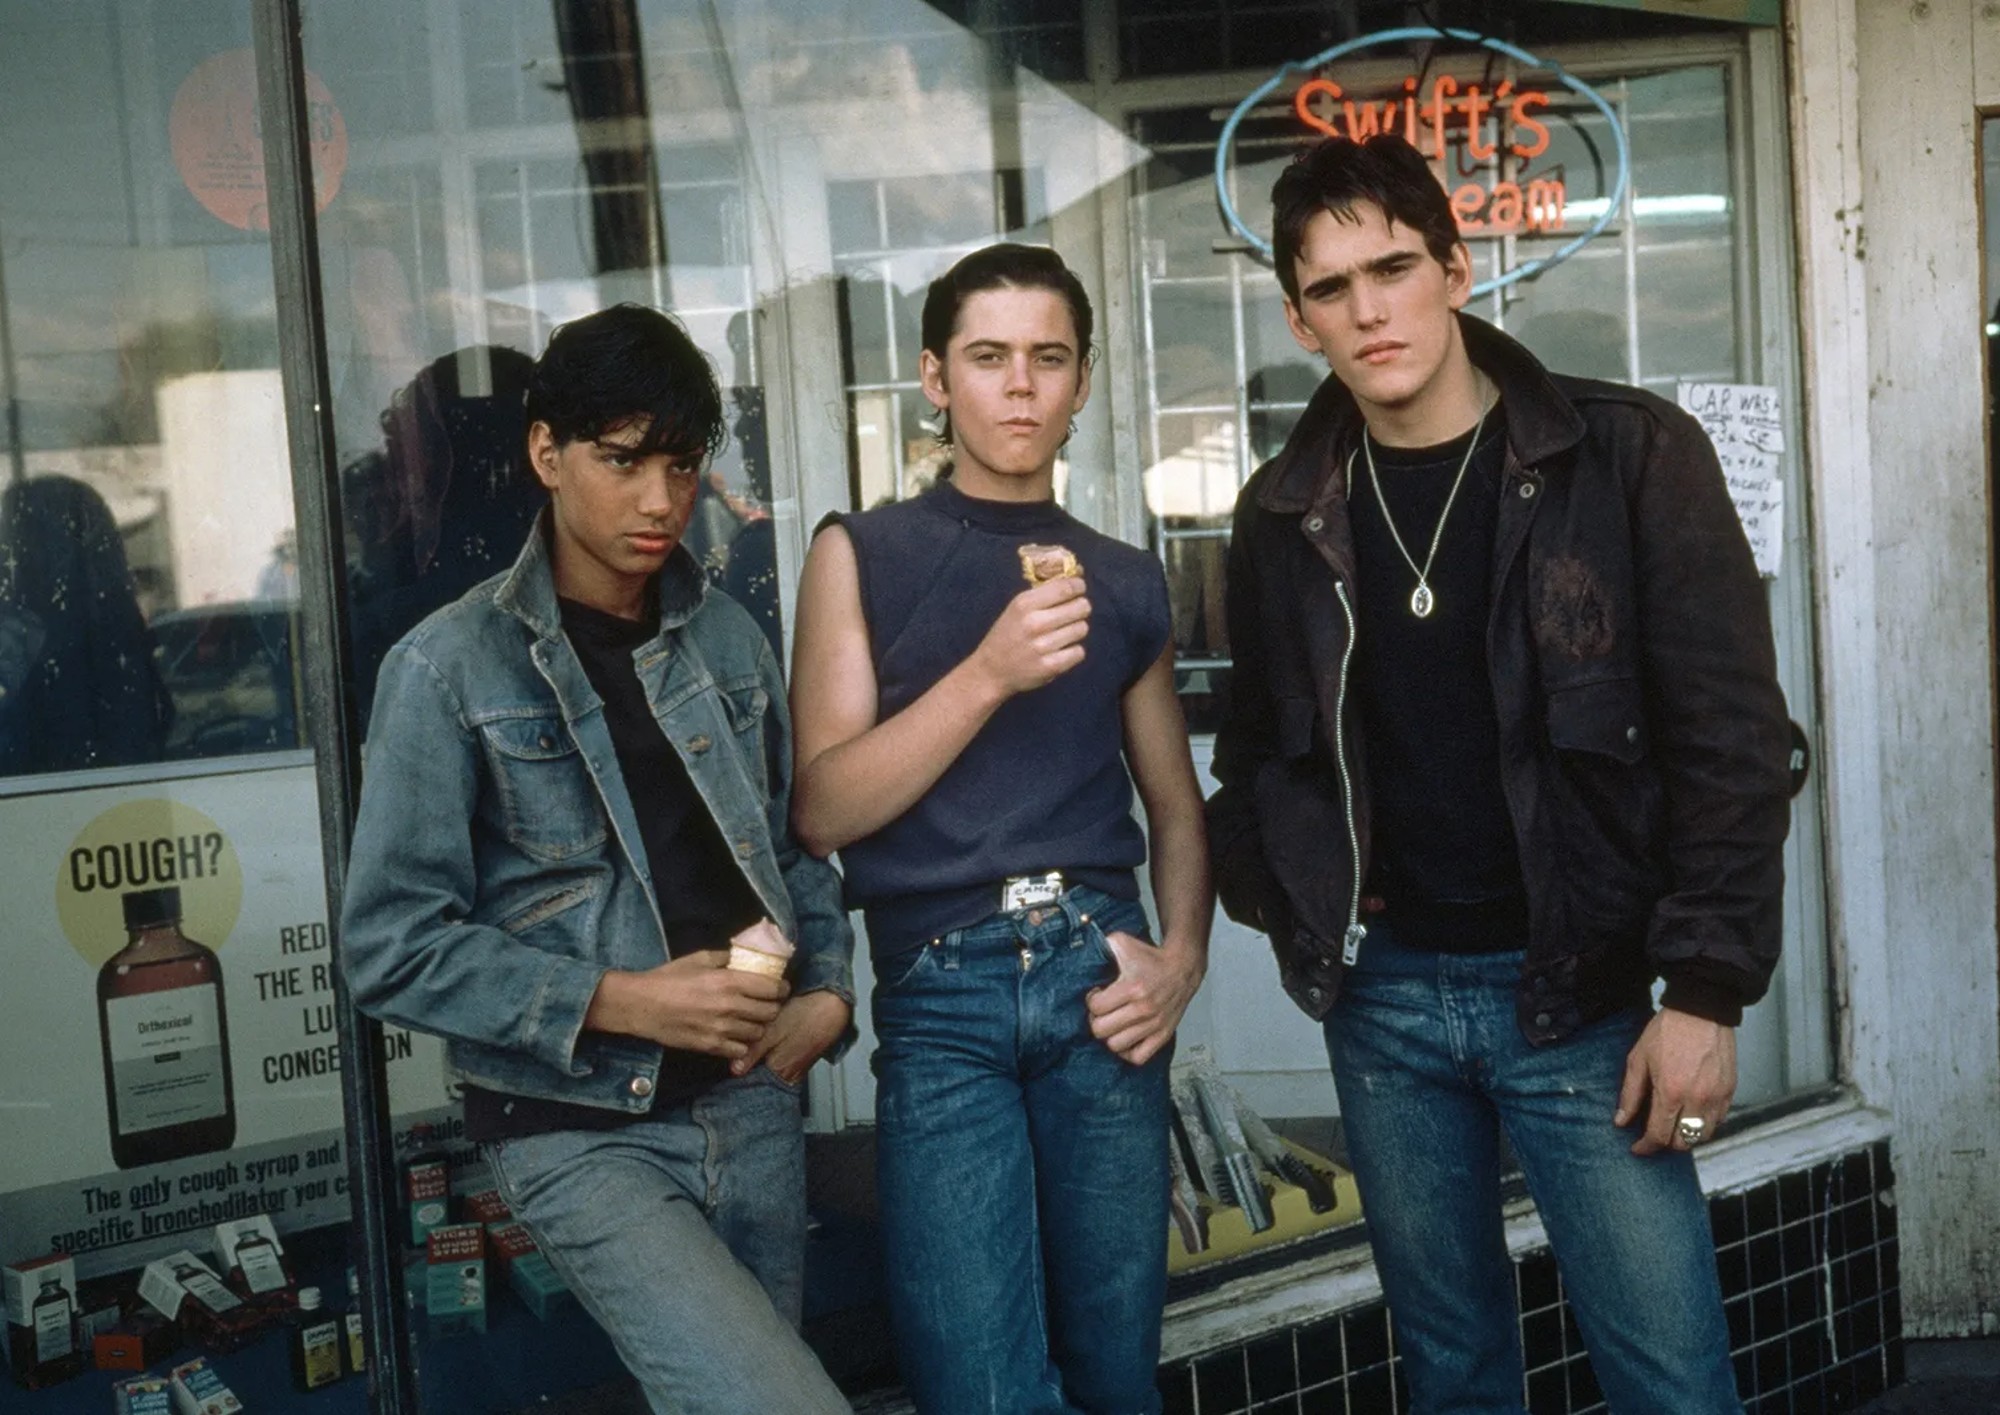 Image from the motion picture The Outsiders